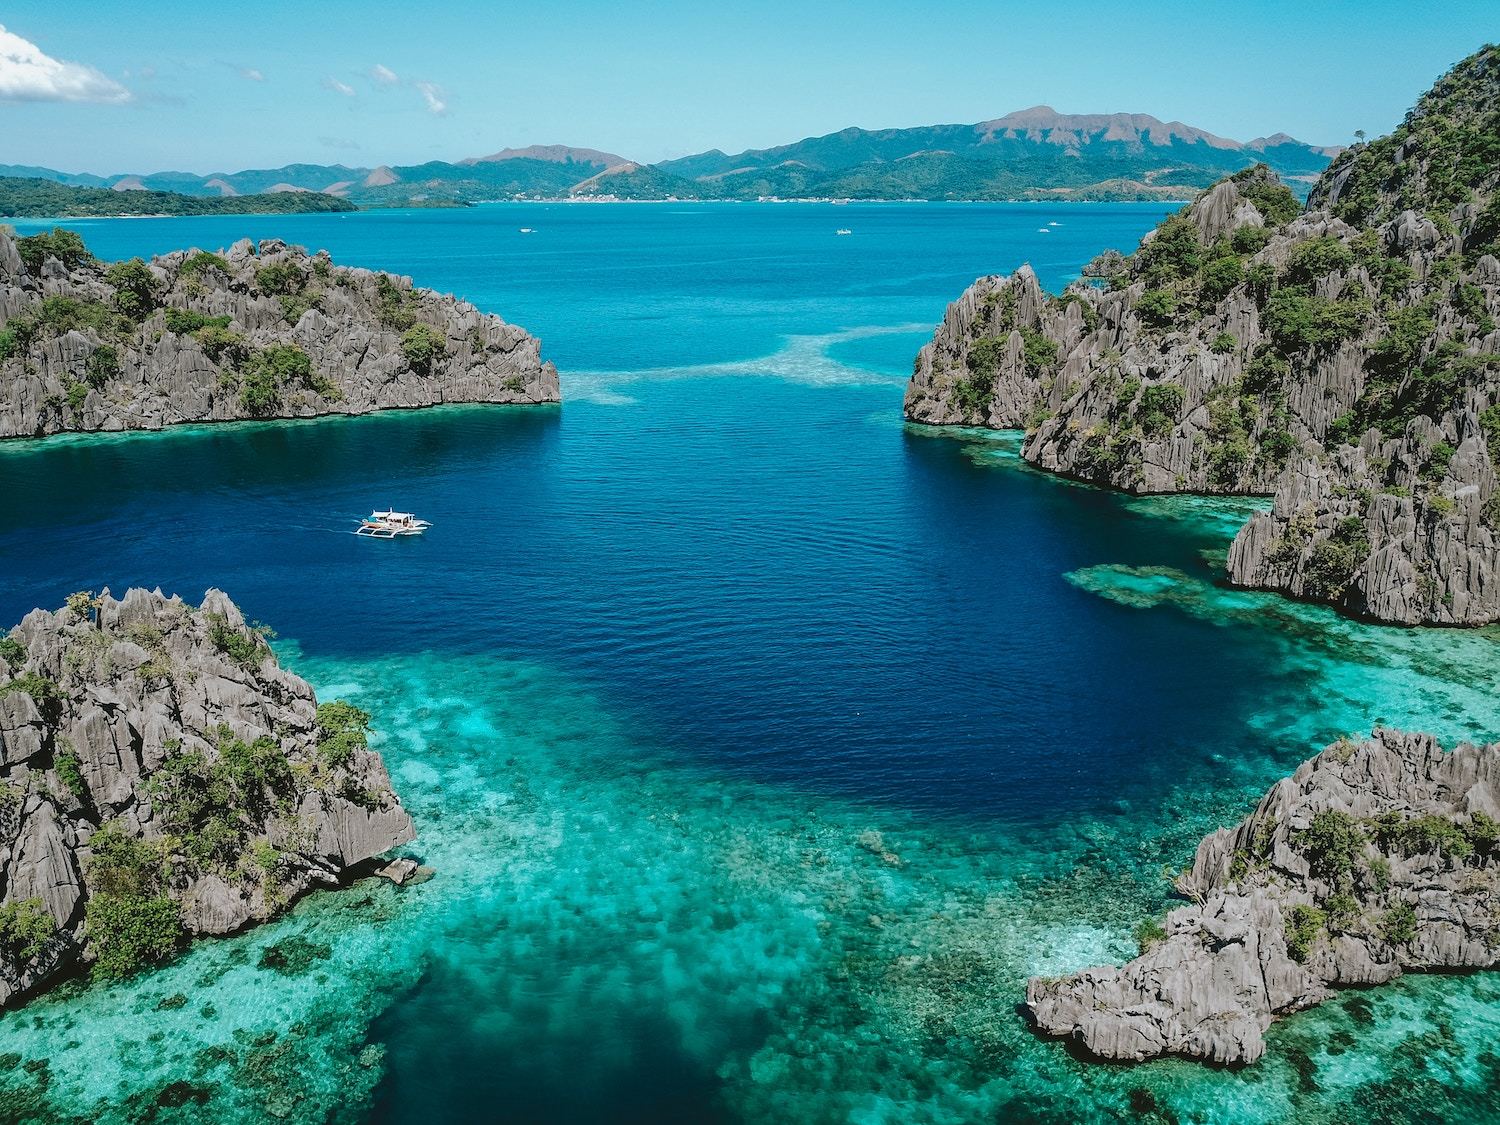 Best Coron Resorts - Where to stay in Coron 2019